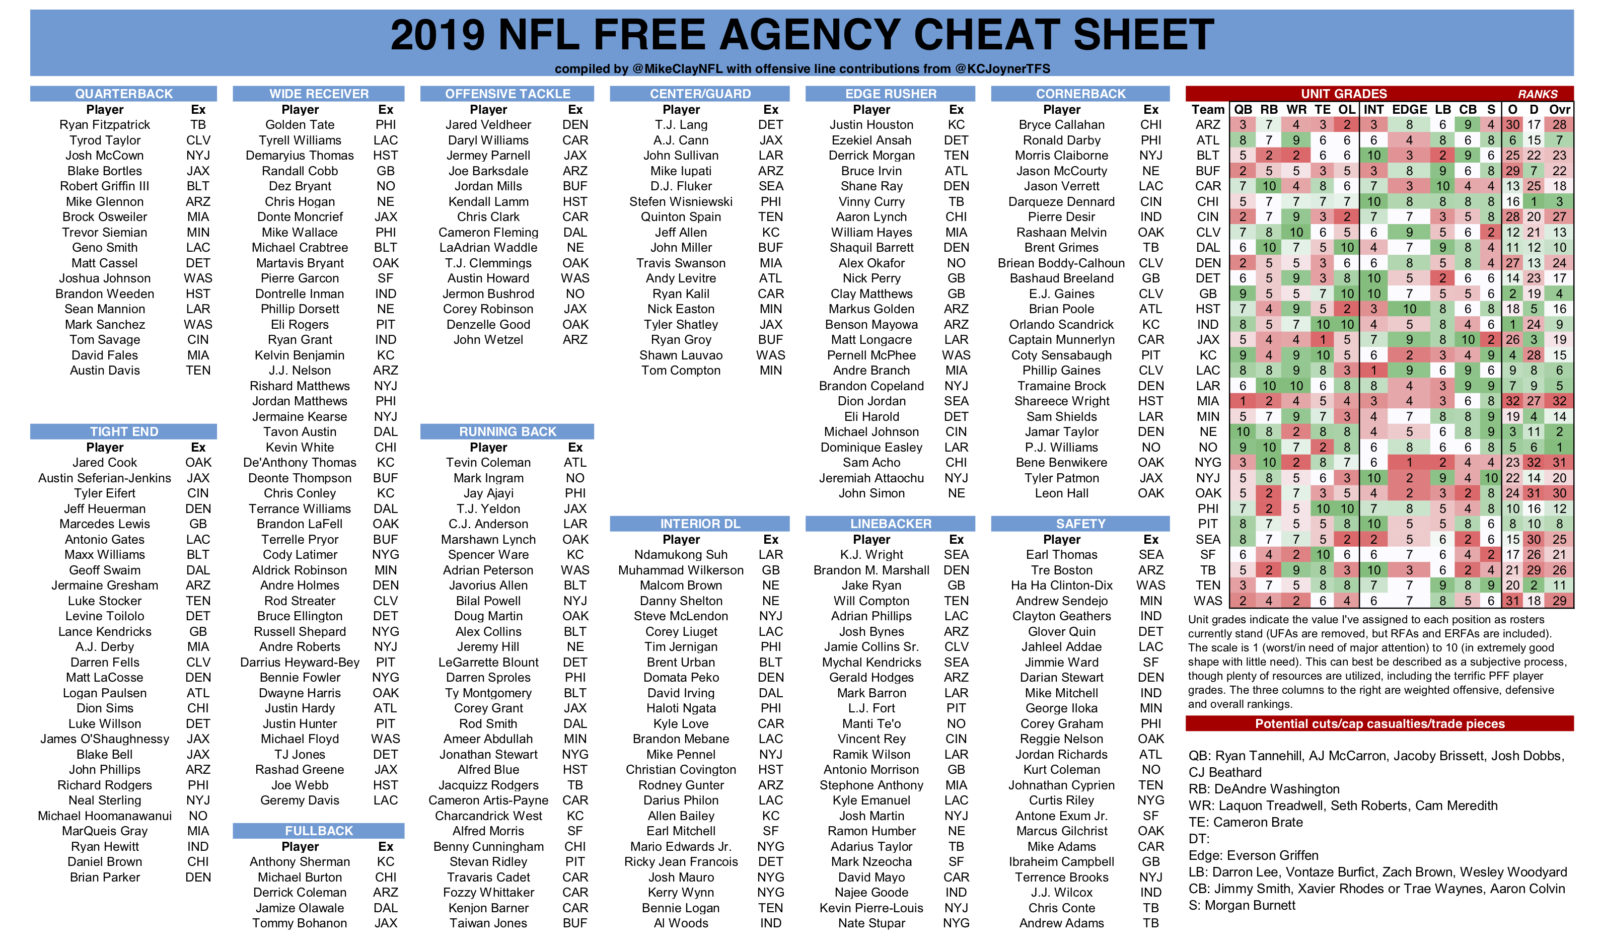 Pssst! Here's Mike Clay's NFL Free Agency Cheat Sheet Pass It On